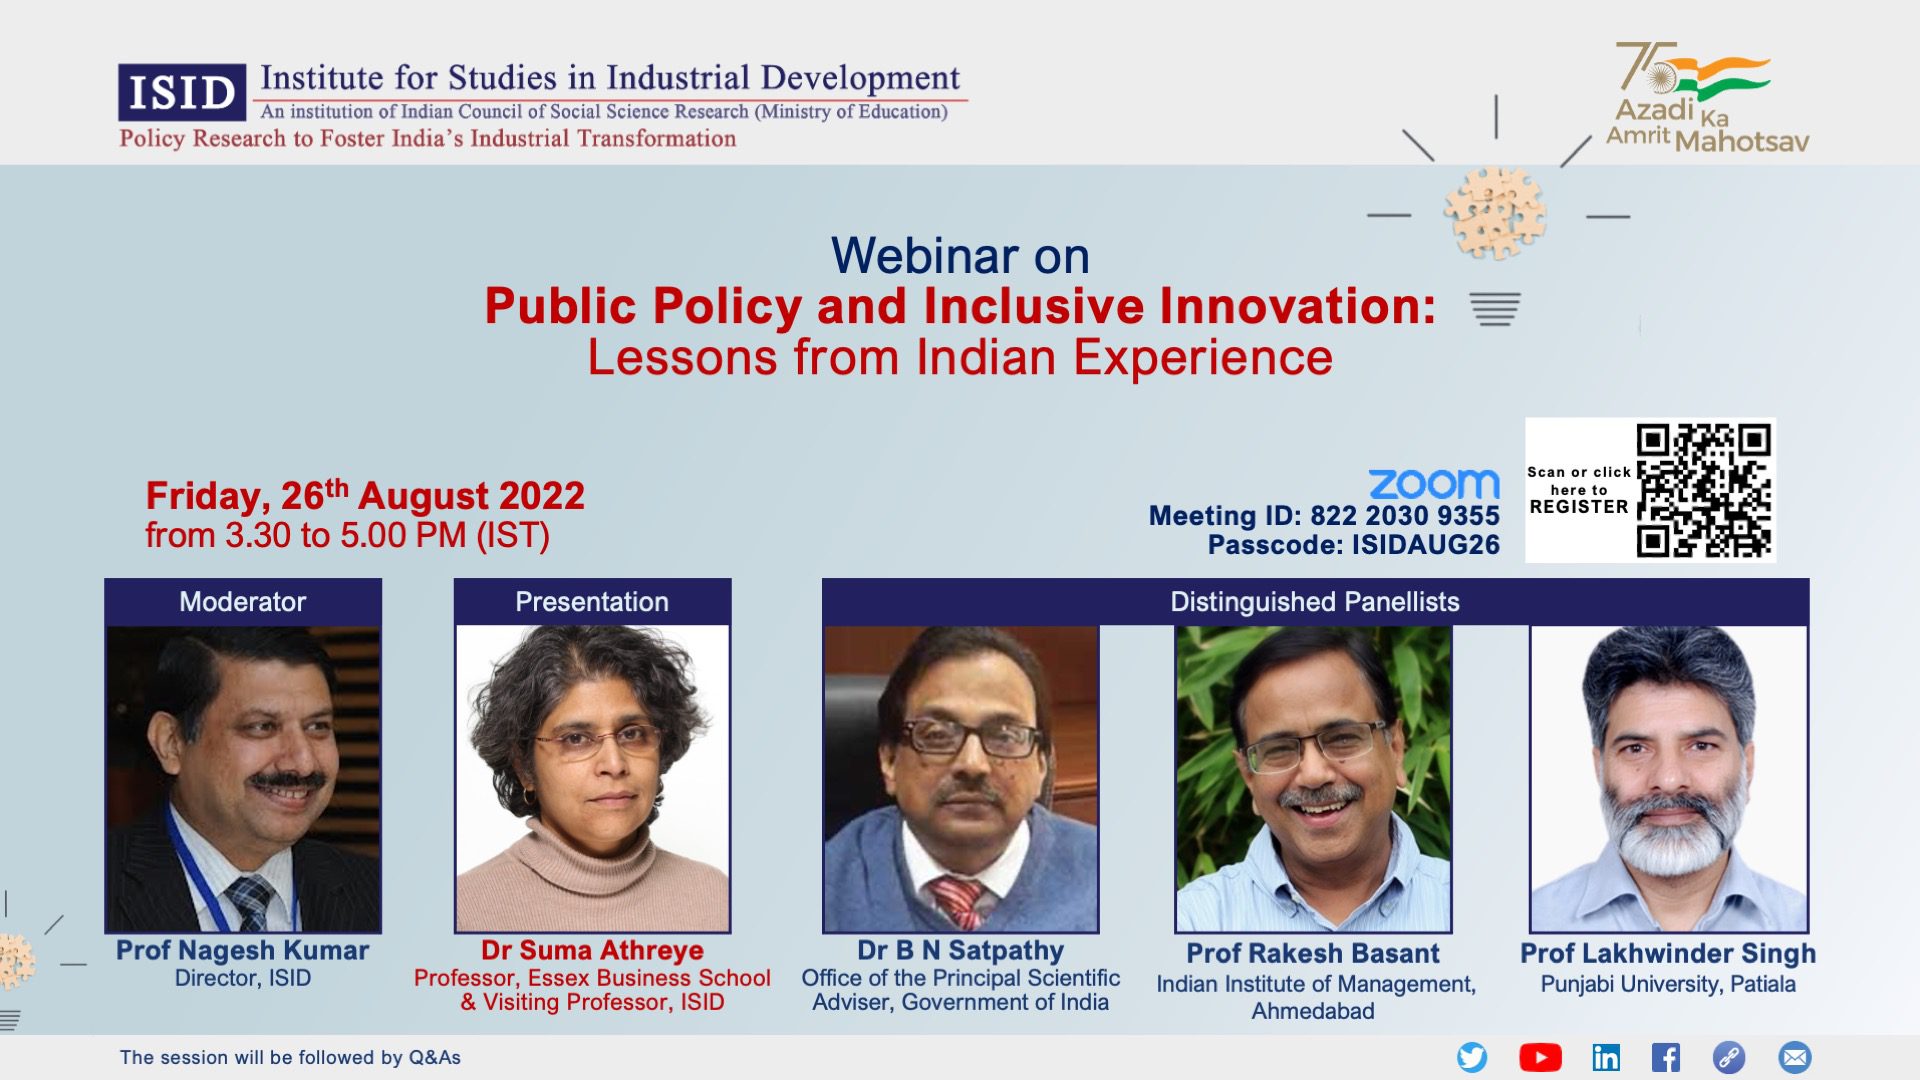 Webinar on Public Policy and Inclusive Innovation: Lessons from Indian Experience